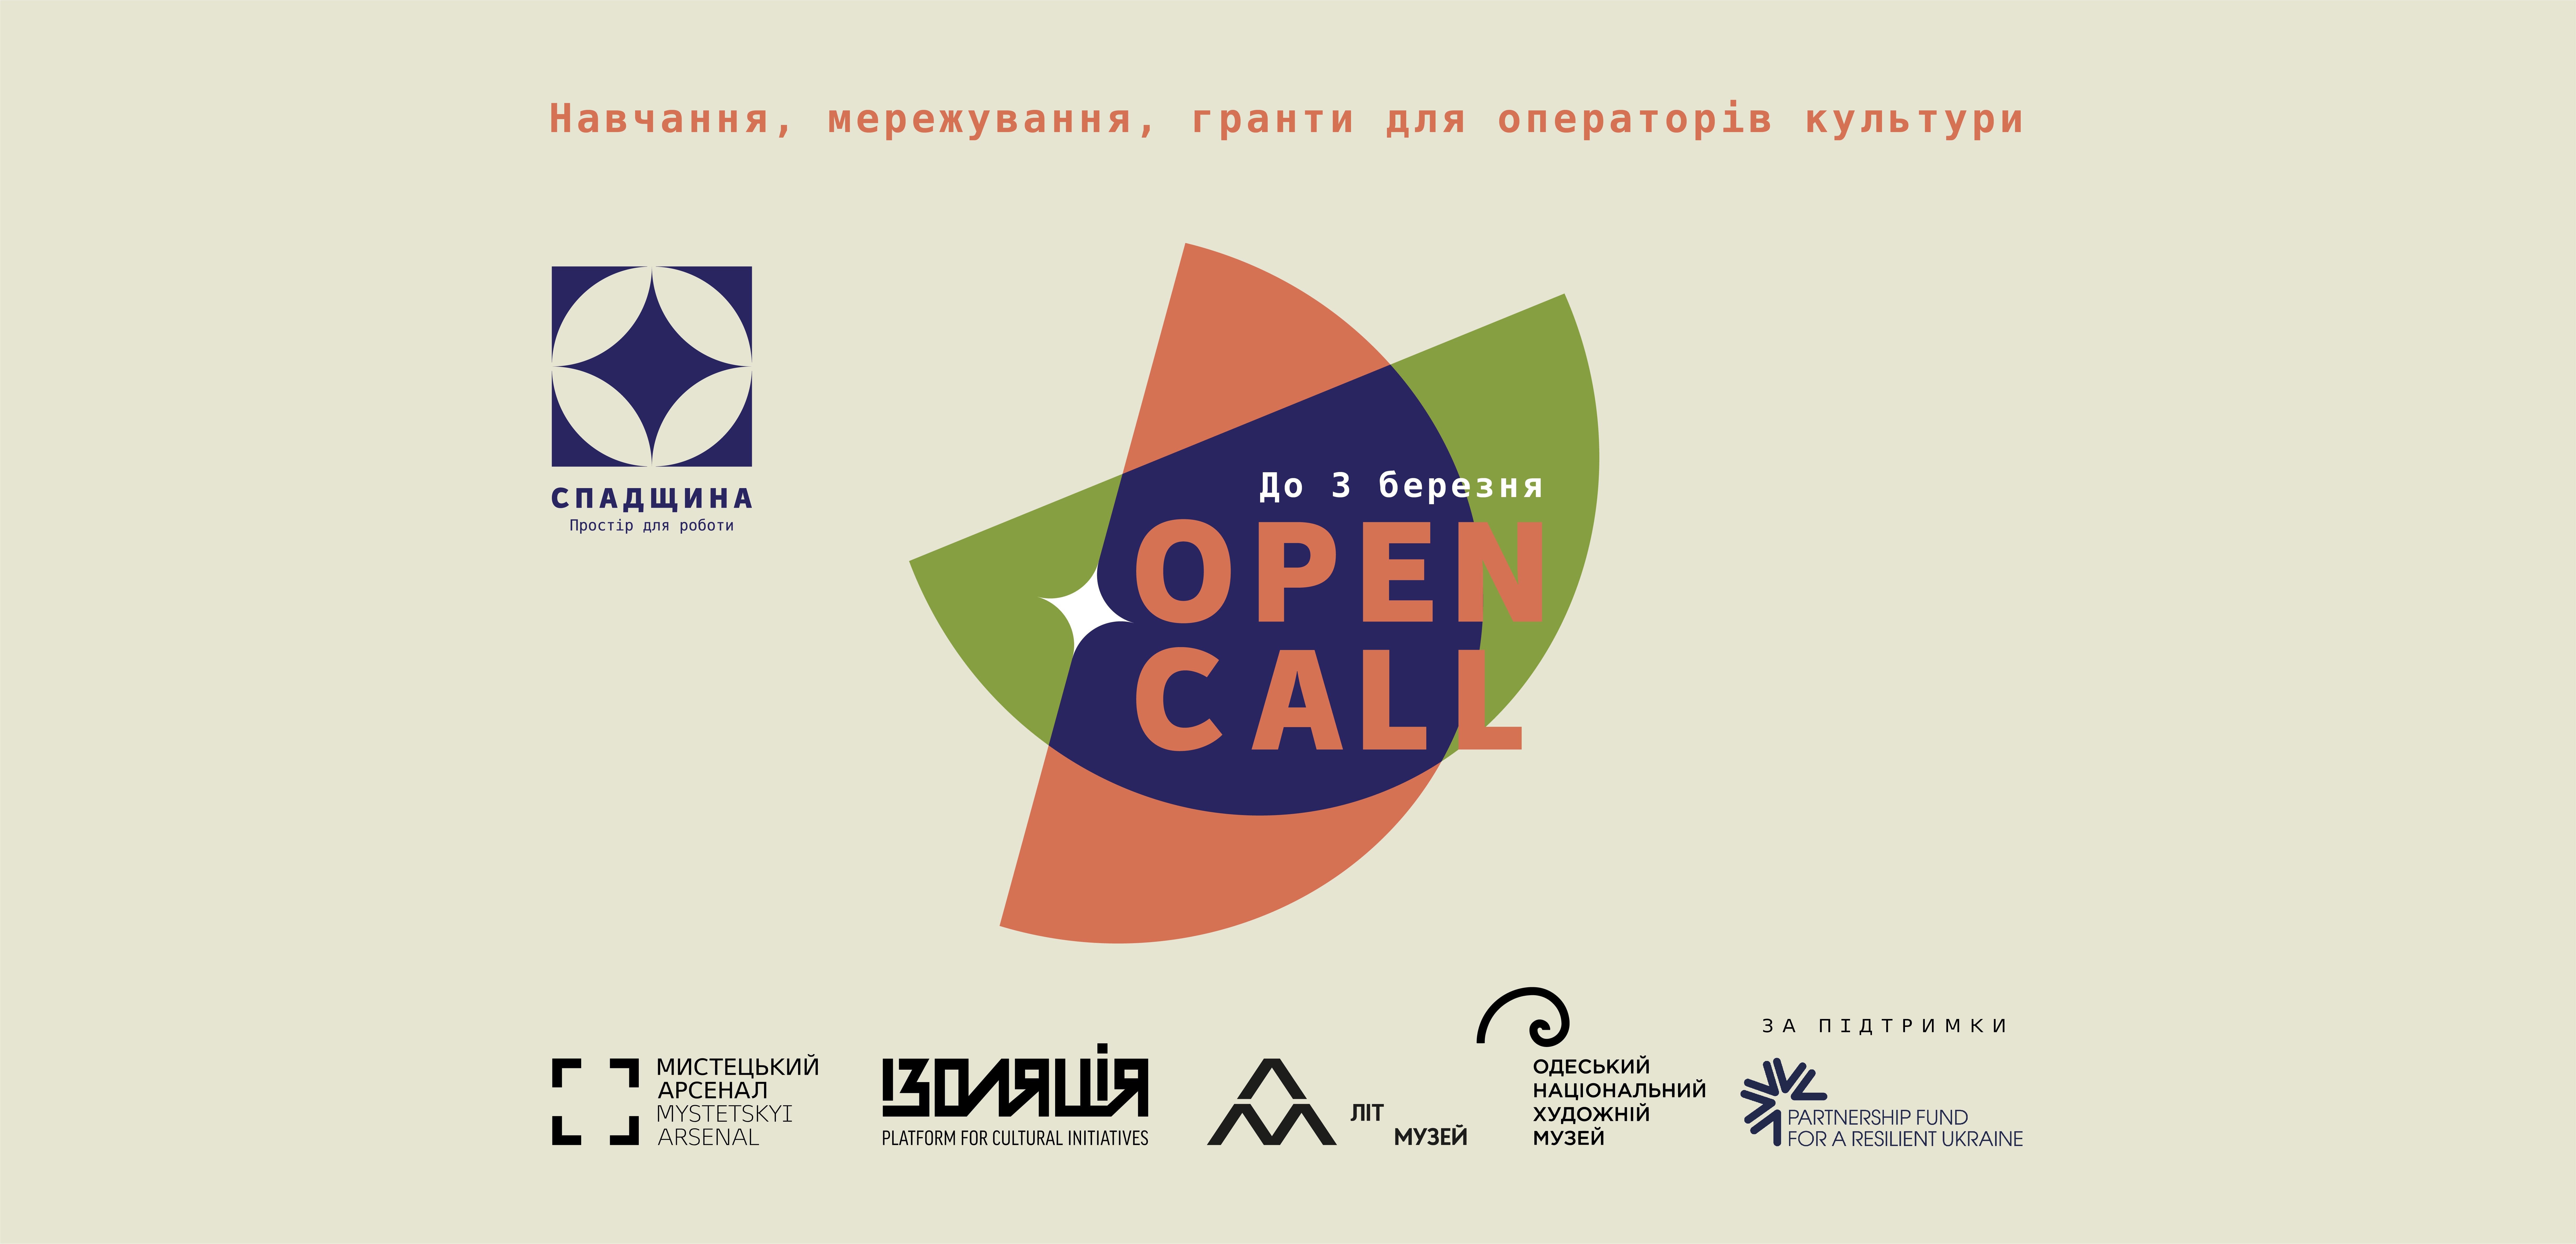 Open Call for participation in the Heritage. Space for work program